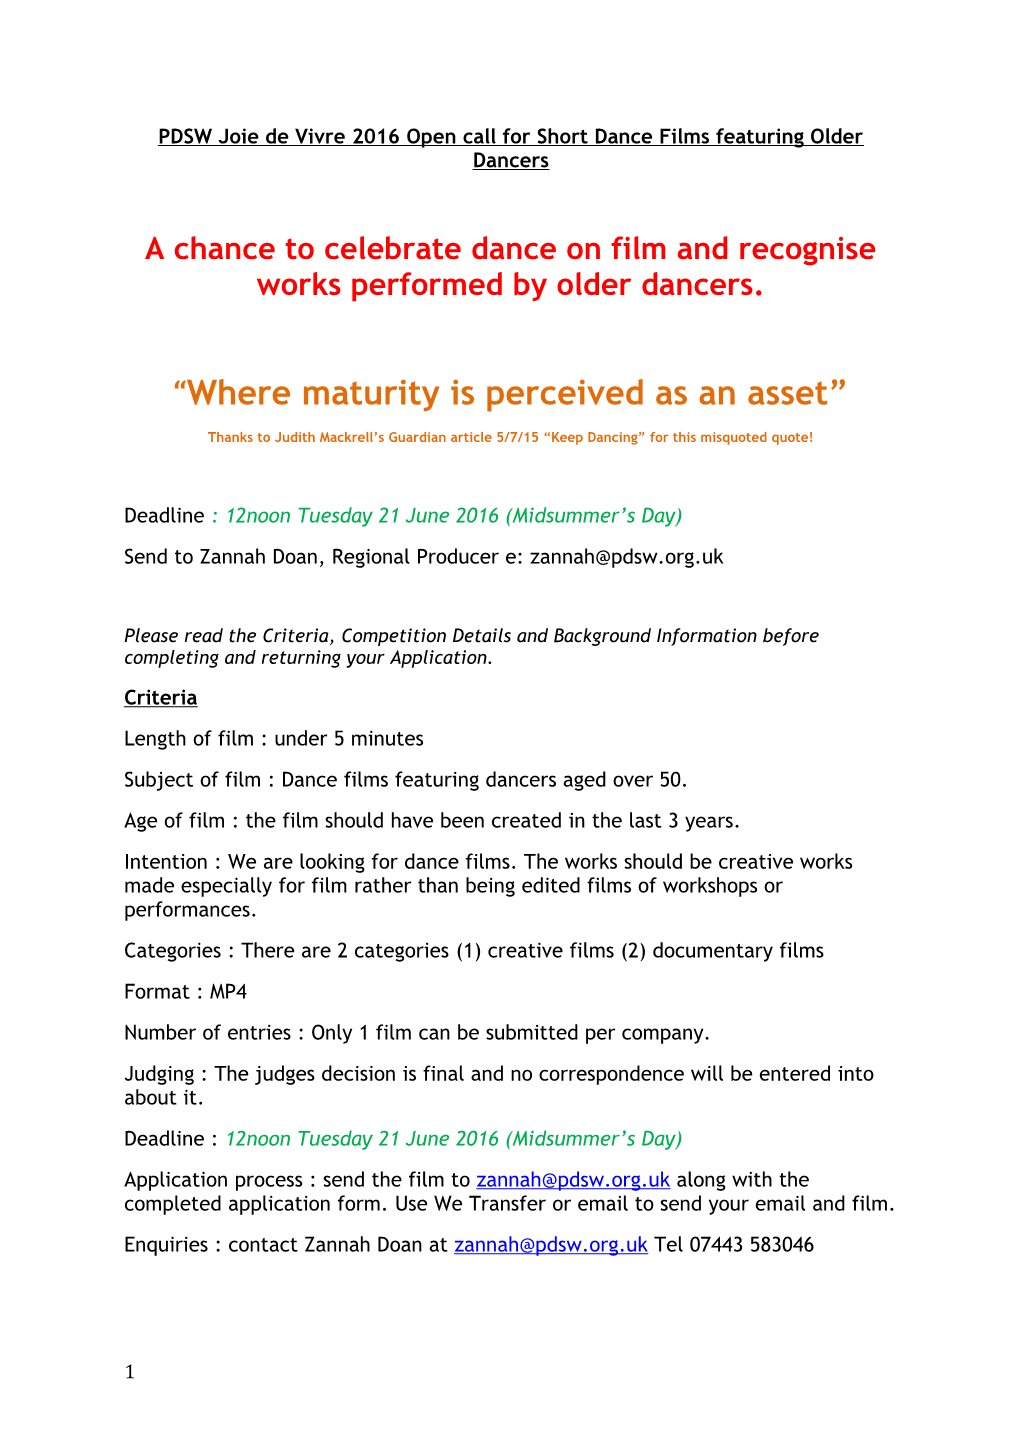 A Chance to Celebrate Dance on Film and Recognise Works Performed by Older Dancers